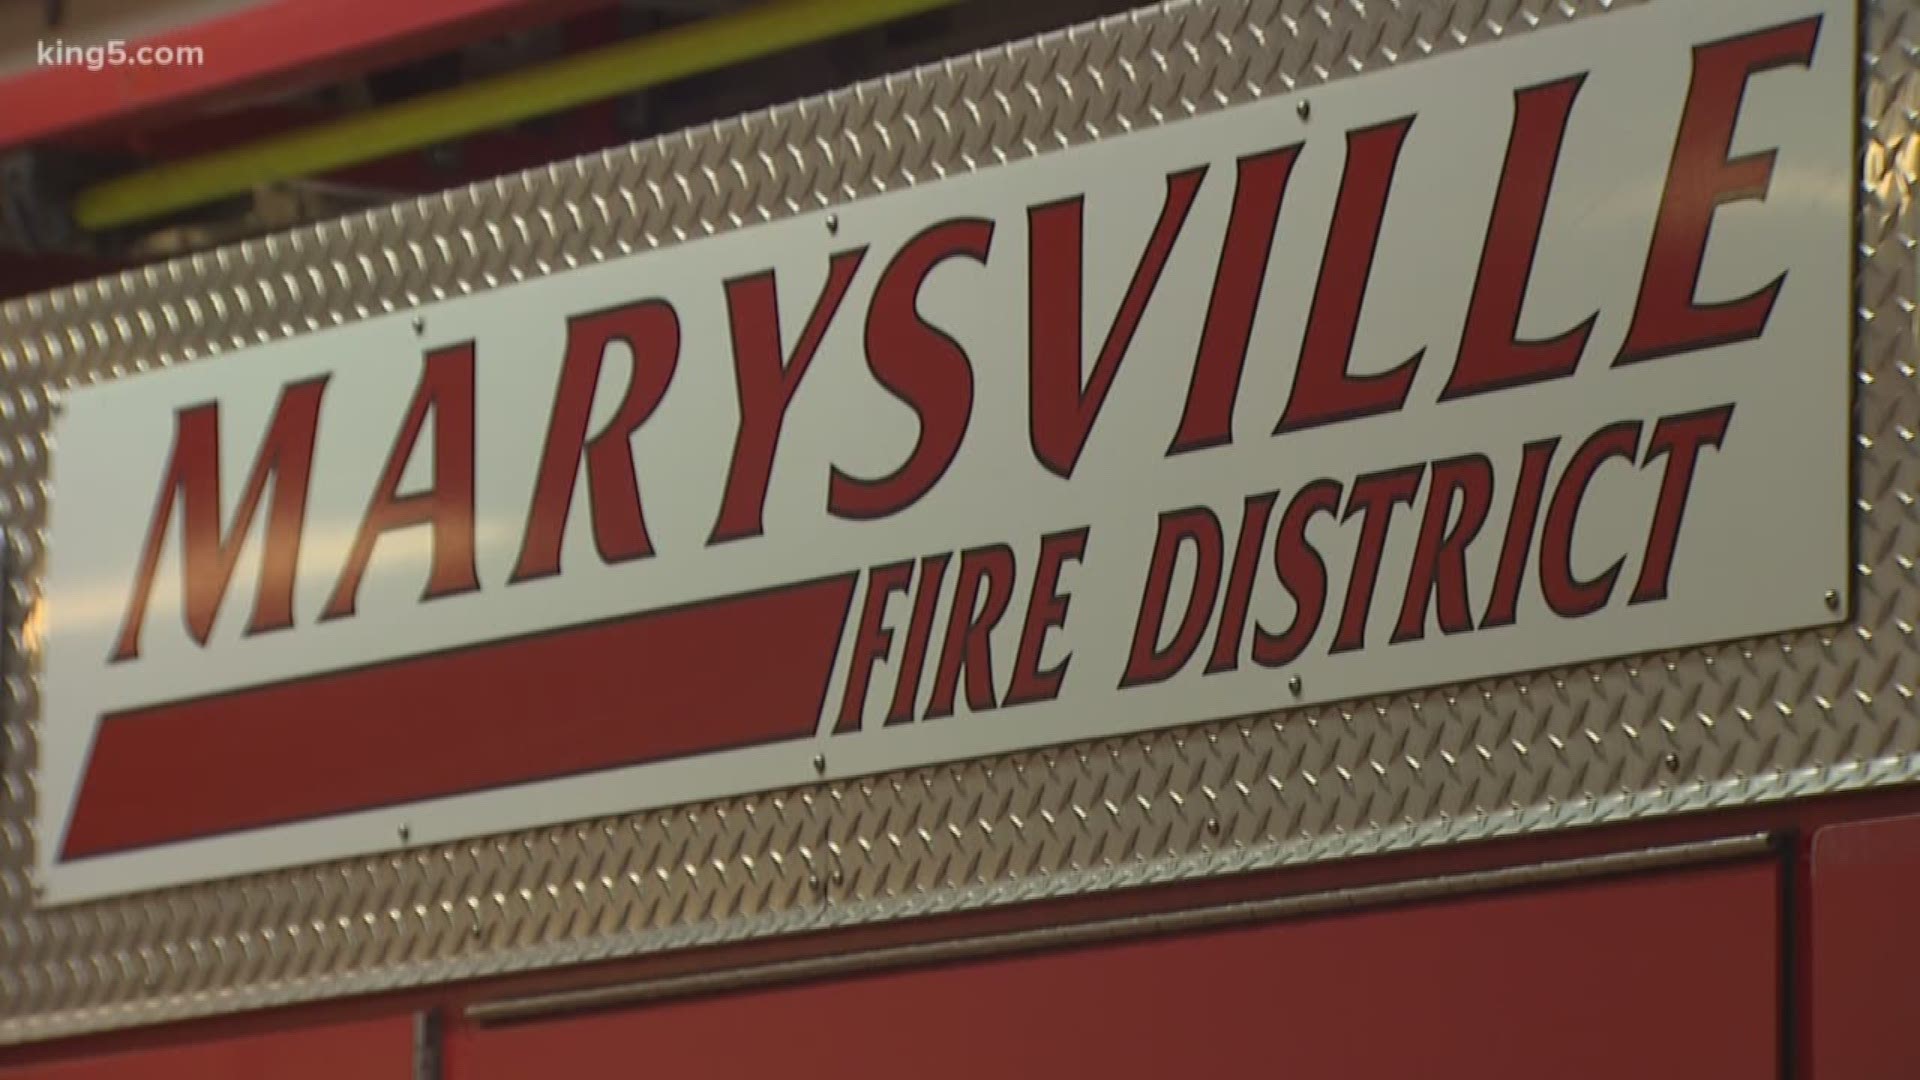 The future of fire safety in Marysville is being hotly debated these days. Voters are being asked to help restore aging equipment and hire more personnel. But that means raising taxes. As KING 5's Eric Wilkinson tells us, the issue is very personal to one particular firefighter.